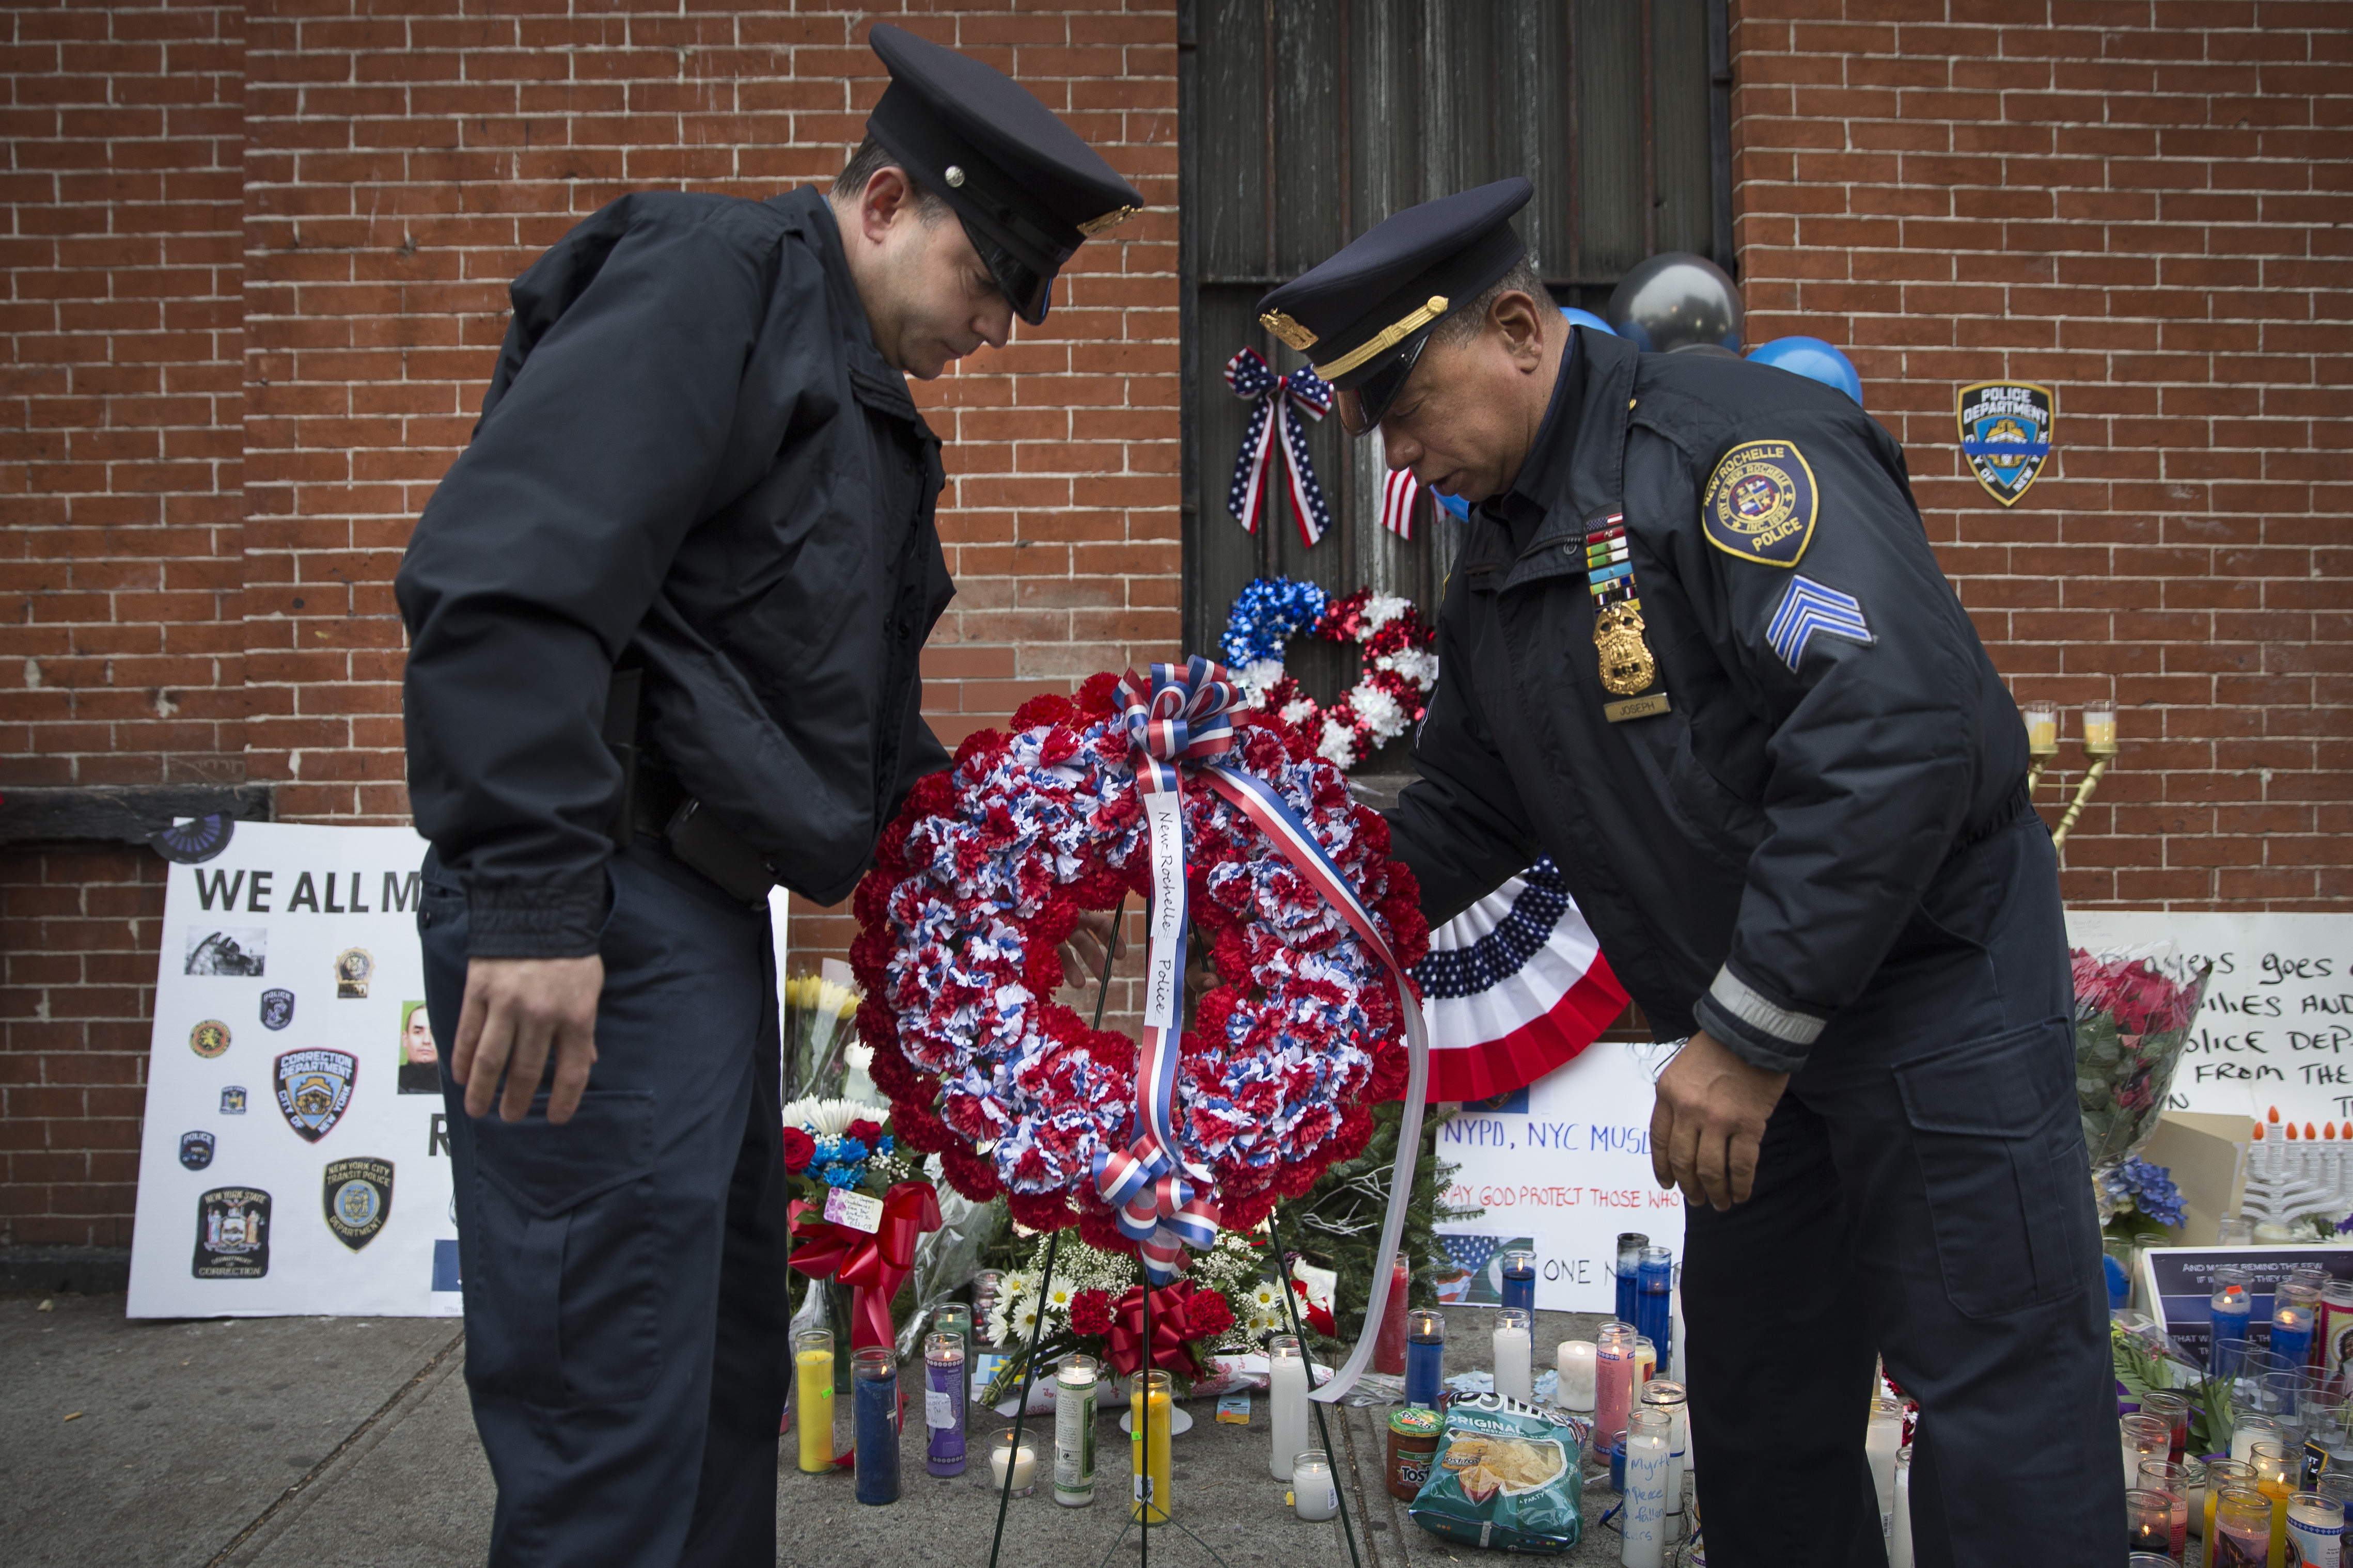 In this file photo, members of the New Rochelle, N.Y. police department place a wreath at a makeshift memorial near the site where NYPD officers Rafael Ramos and Wenjian Liu were murdered in the Brooklyn borough of New York, Dec. 22, 2014. (John Minchillo—AP)